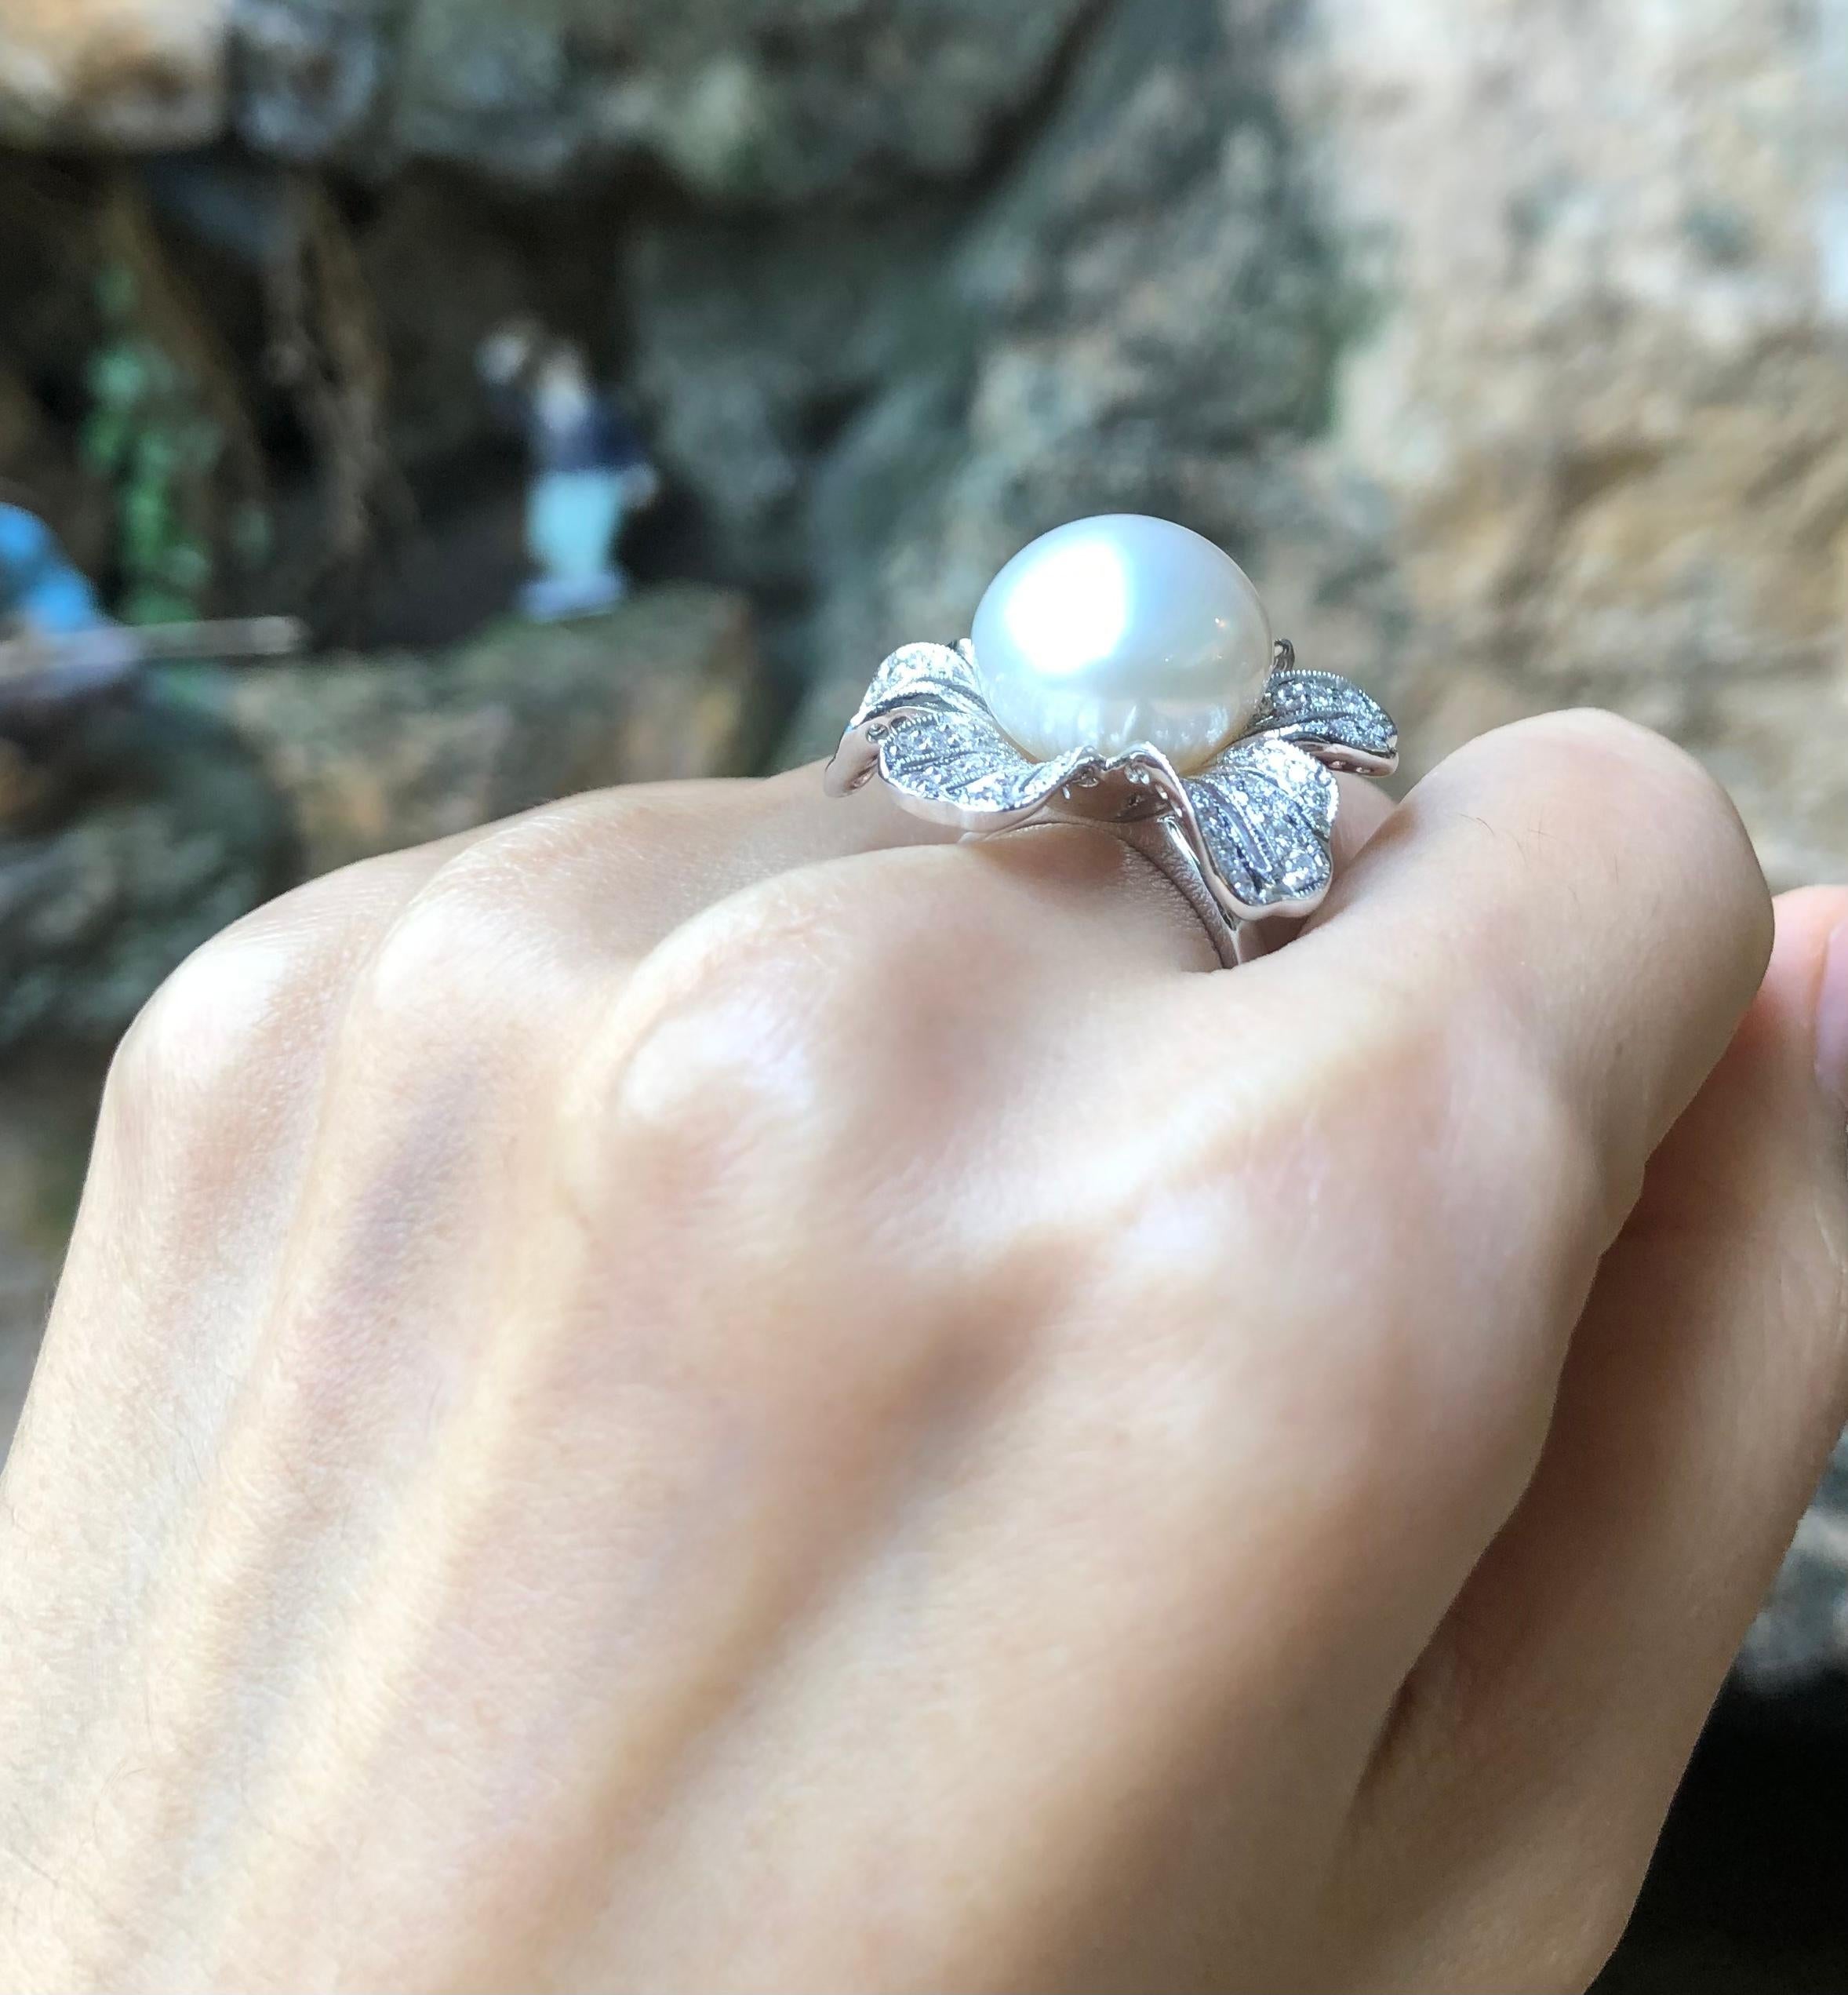 South Sea Pearl with Diamond 0.77 carat Ring set in 18 Karat White Gold Settings

Width:  2.9 cm 
Length: 2.9 cm
Ring Size: 53
Total Weight: 16.3 grams

South Sea Pearl: 14.3 mm

